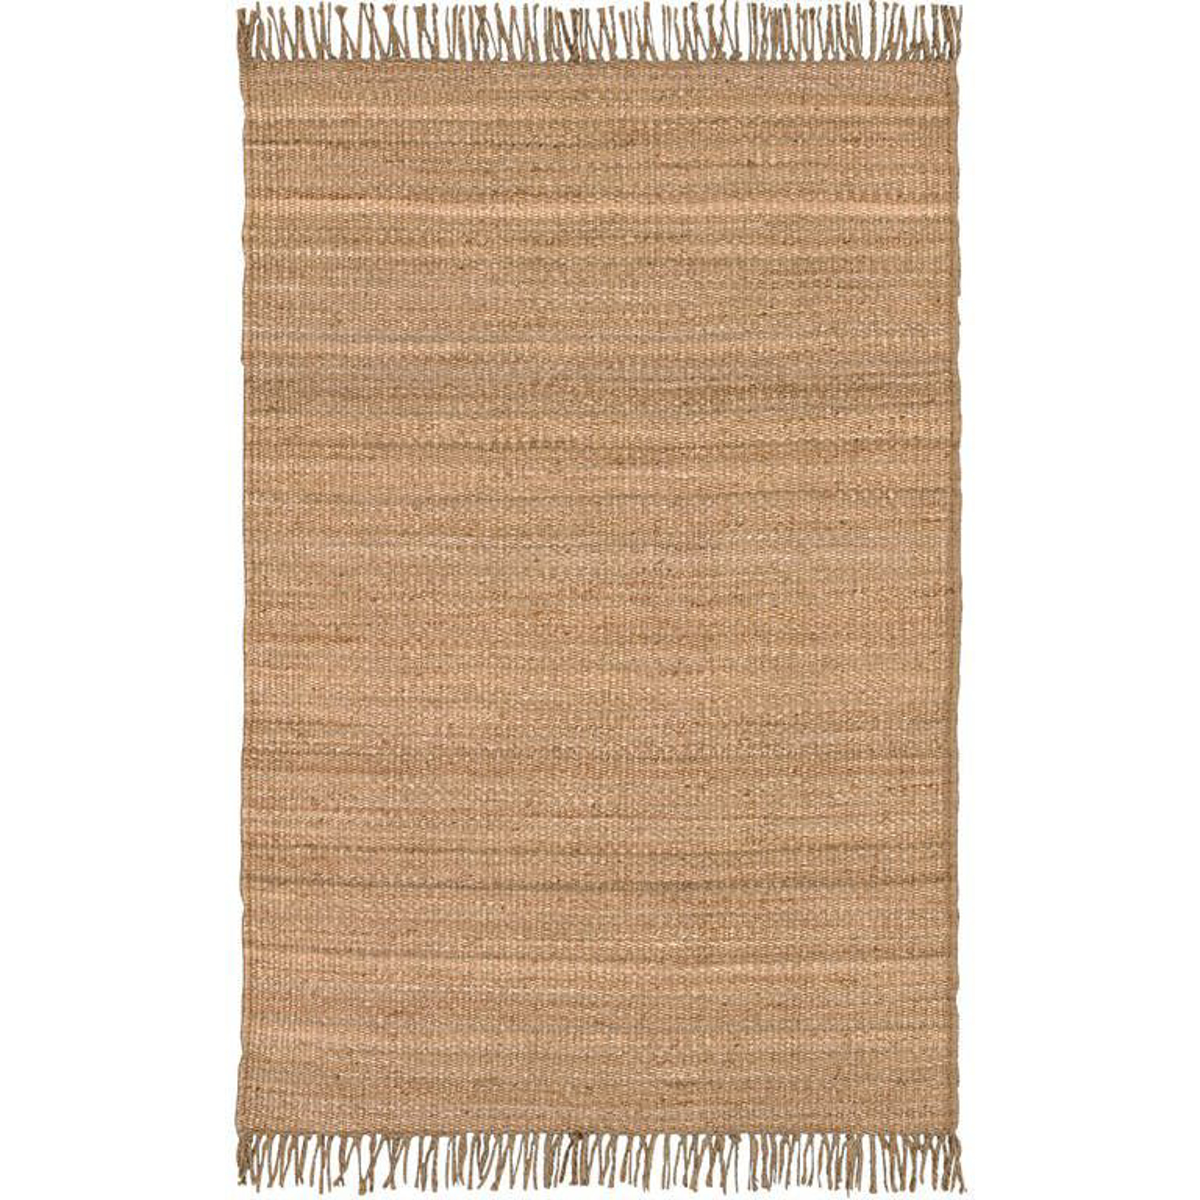 Picture of Jute Natural Woven 5X8 Rug